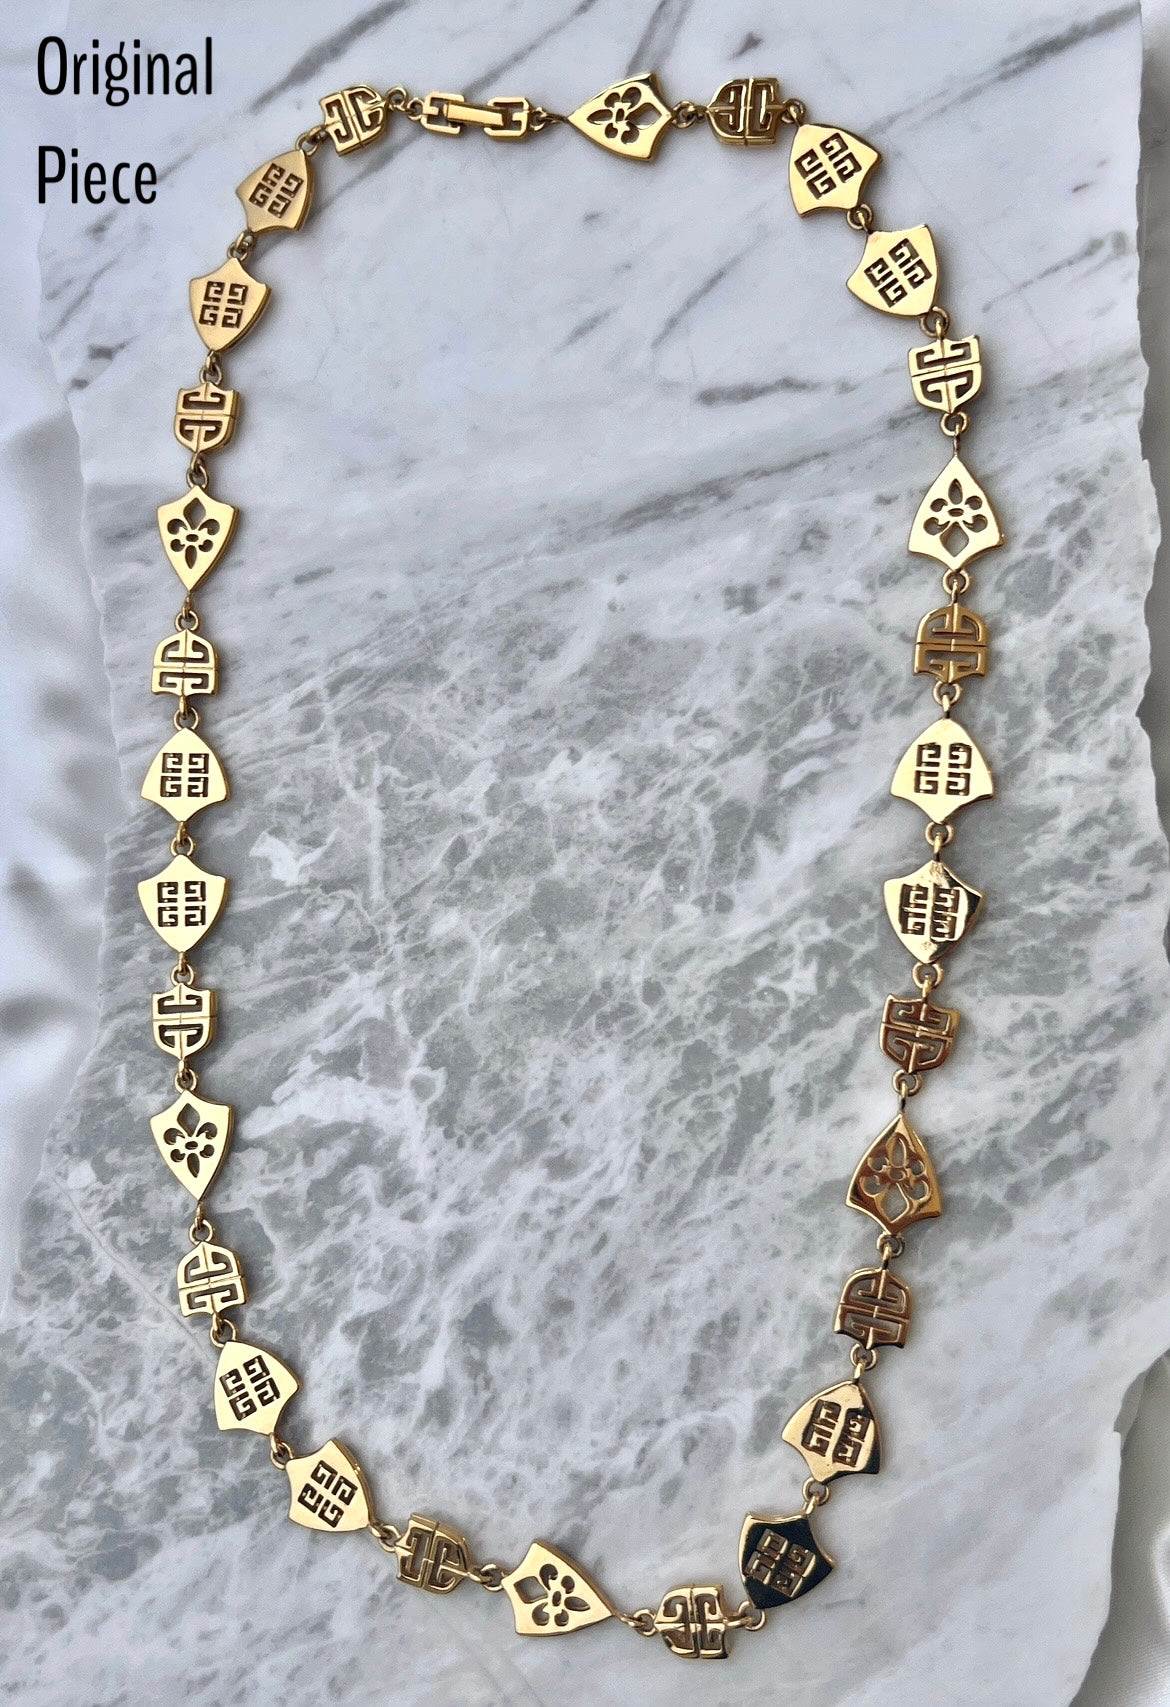 Statement Gold Logo Necklace with Crystal Drop